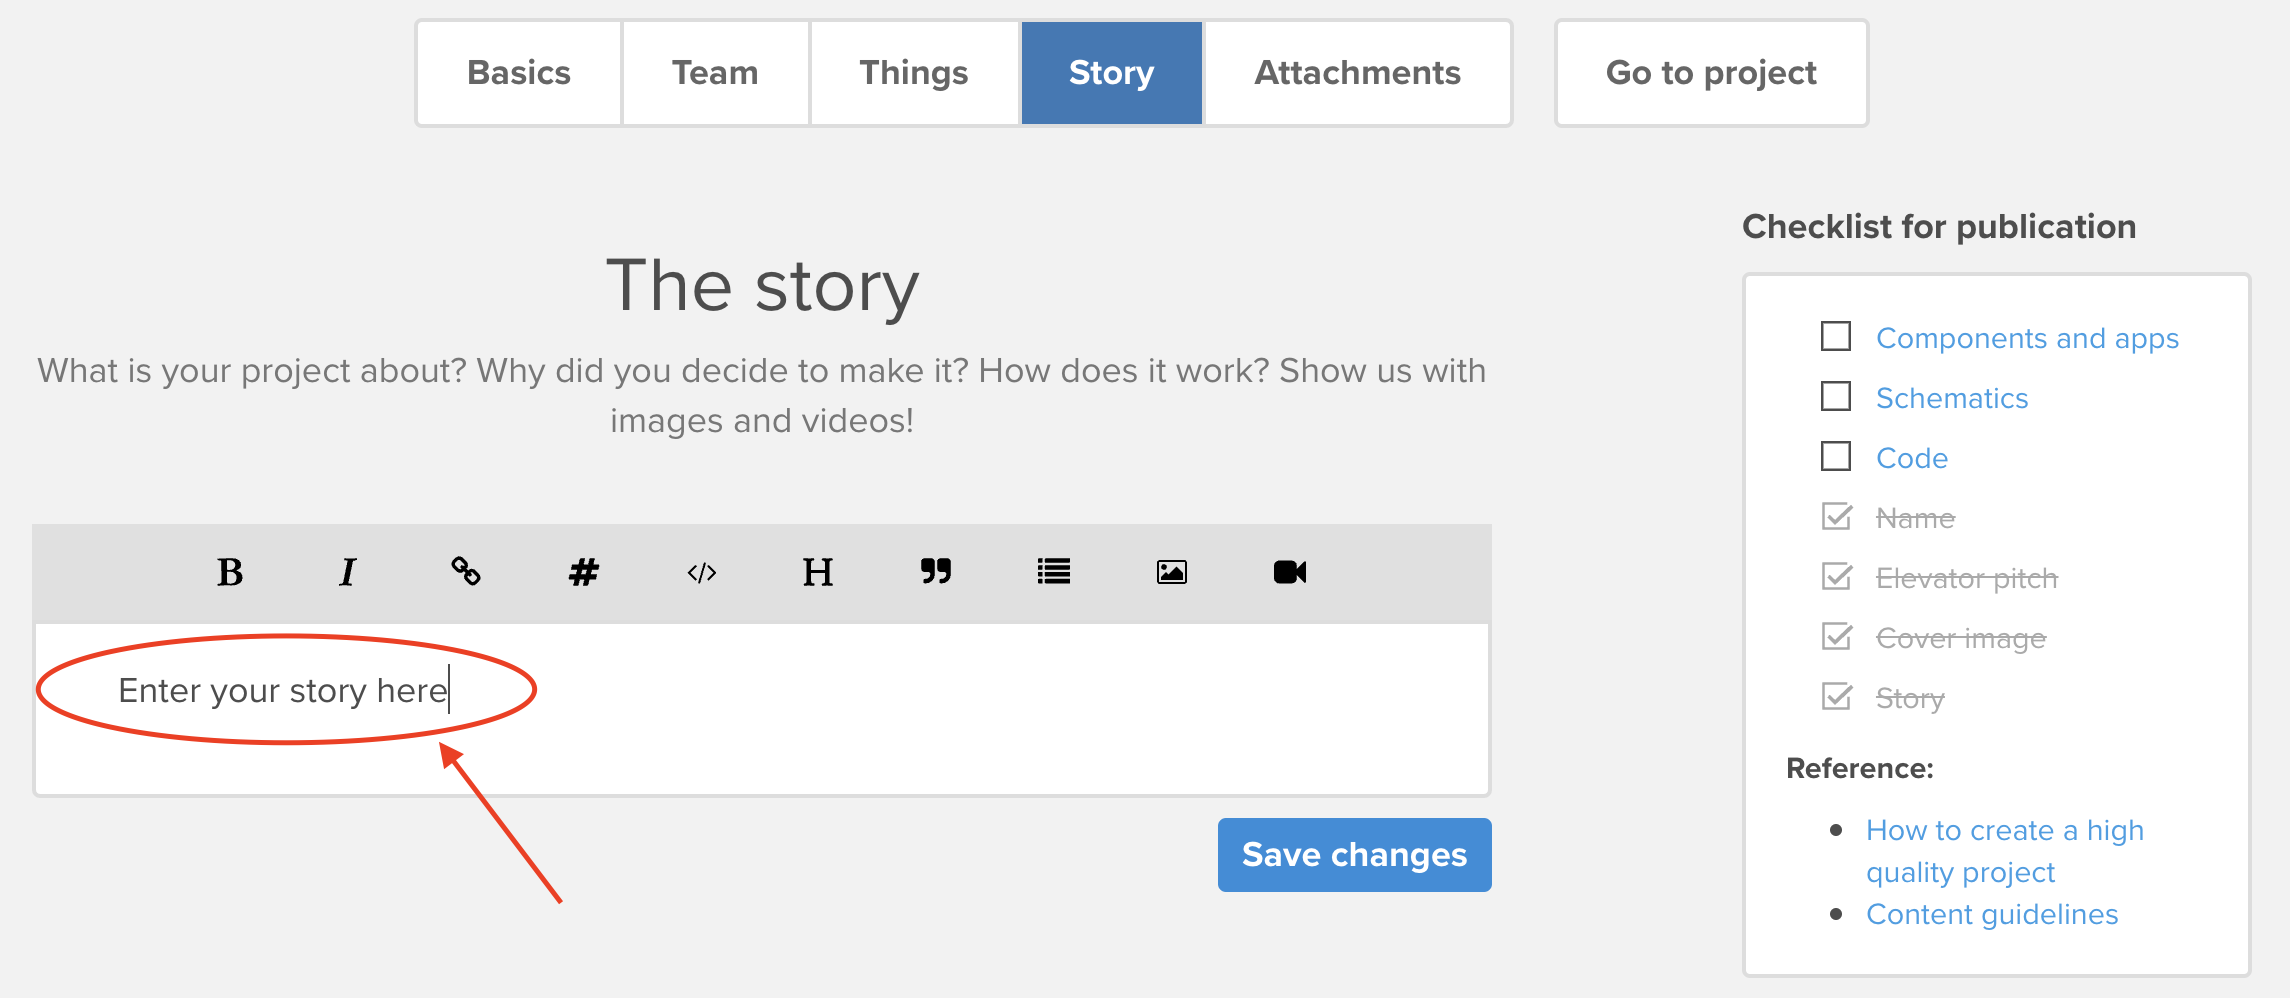 Go to the 'Story' tab and enter your project story